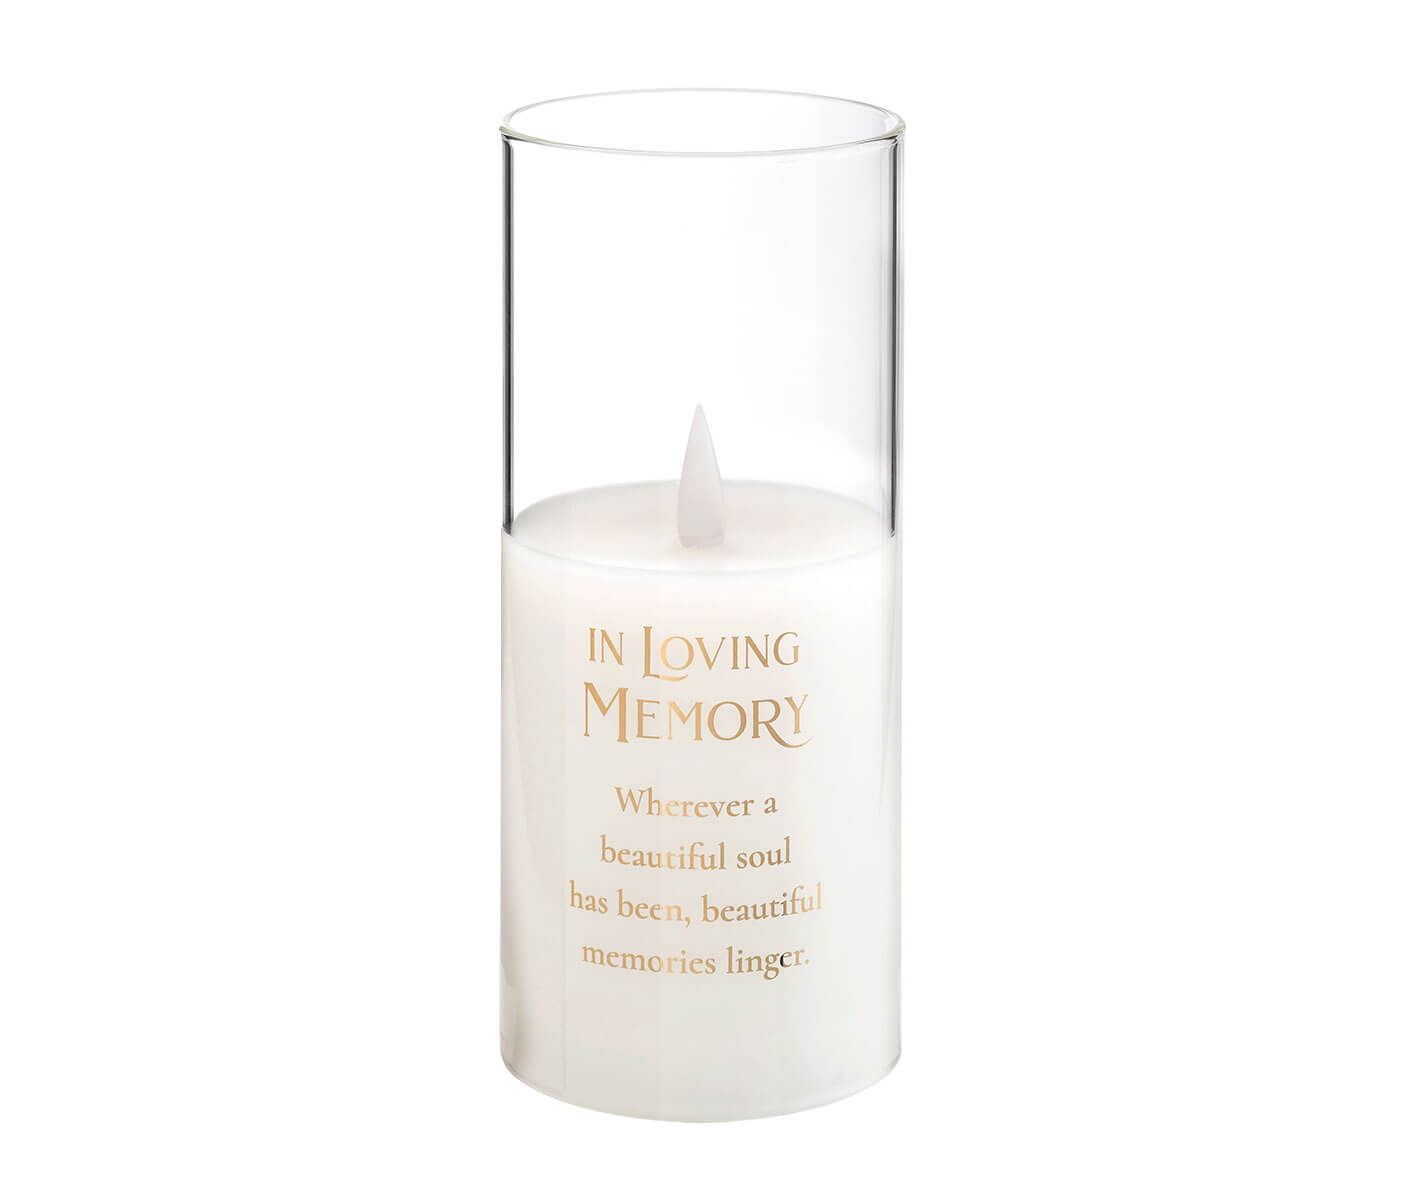 "In Loving Memory" Glass LED Candle Holder with Sympathy Verse